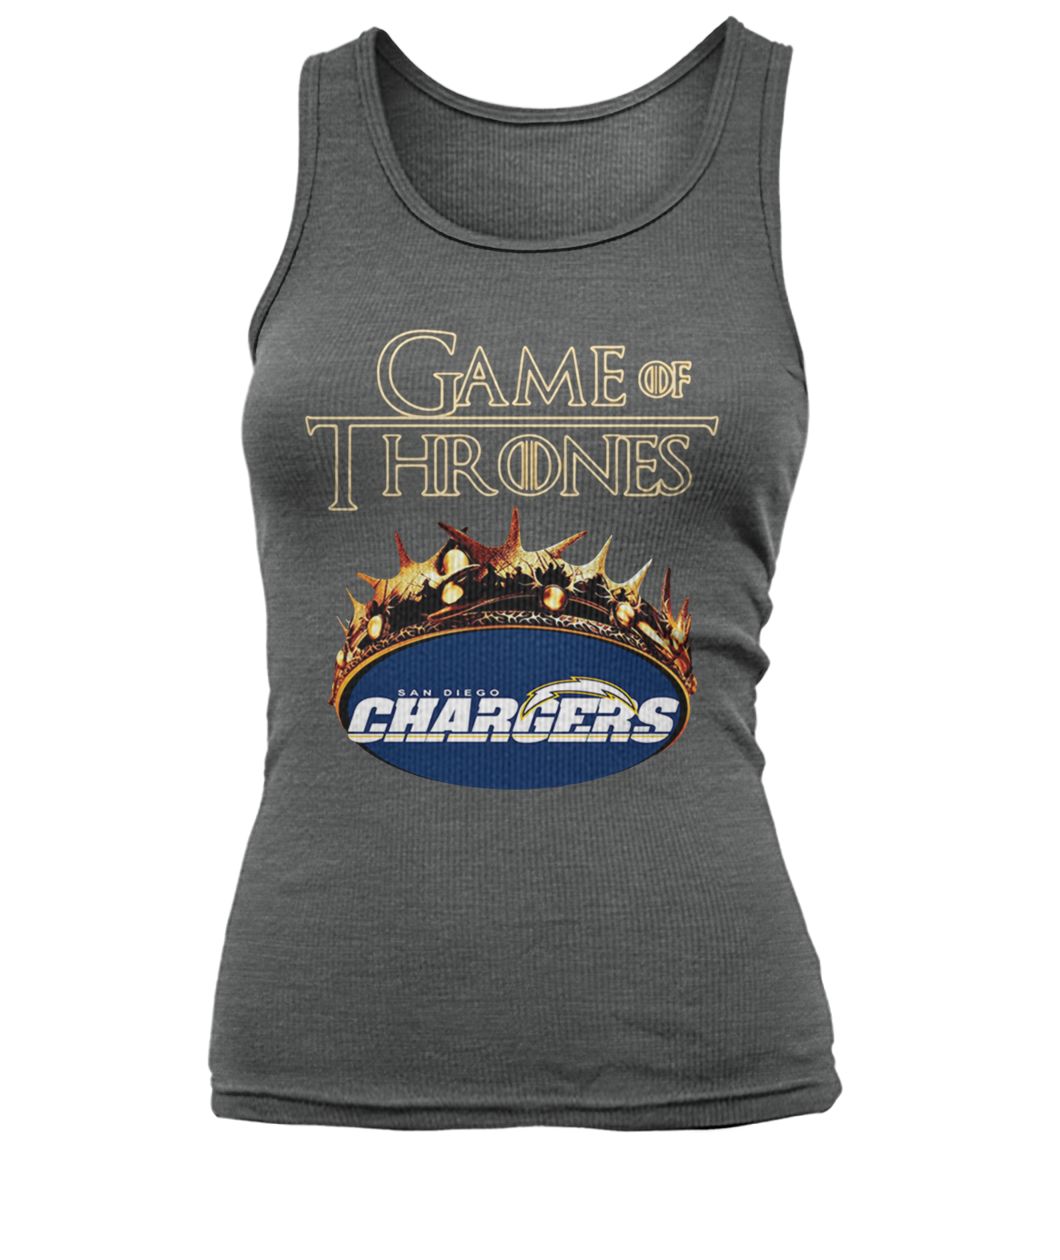 Game of thrones crown los angeles chargers women's tank top